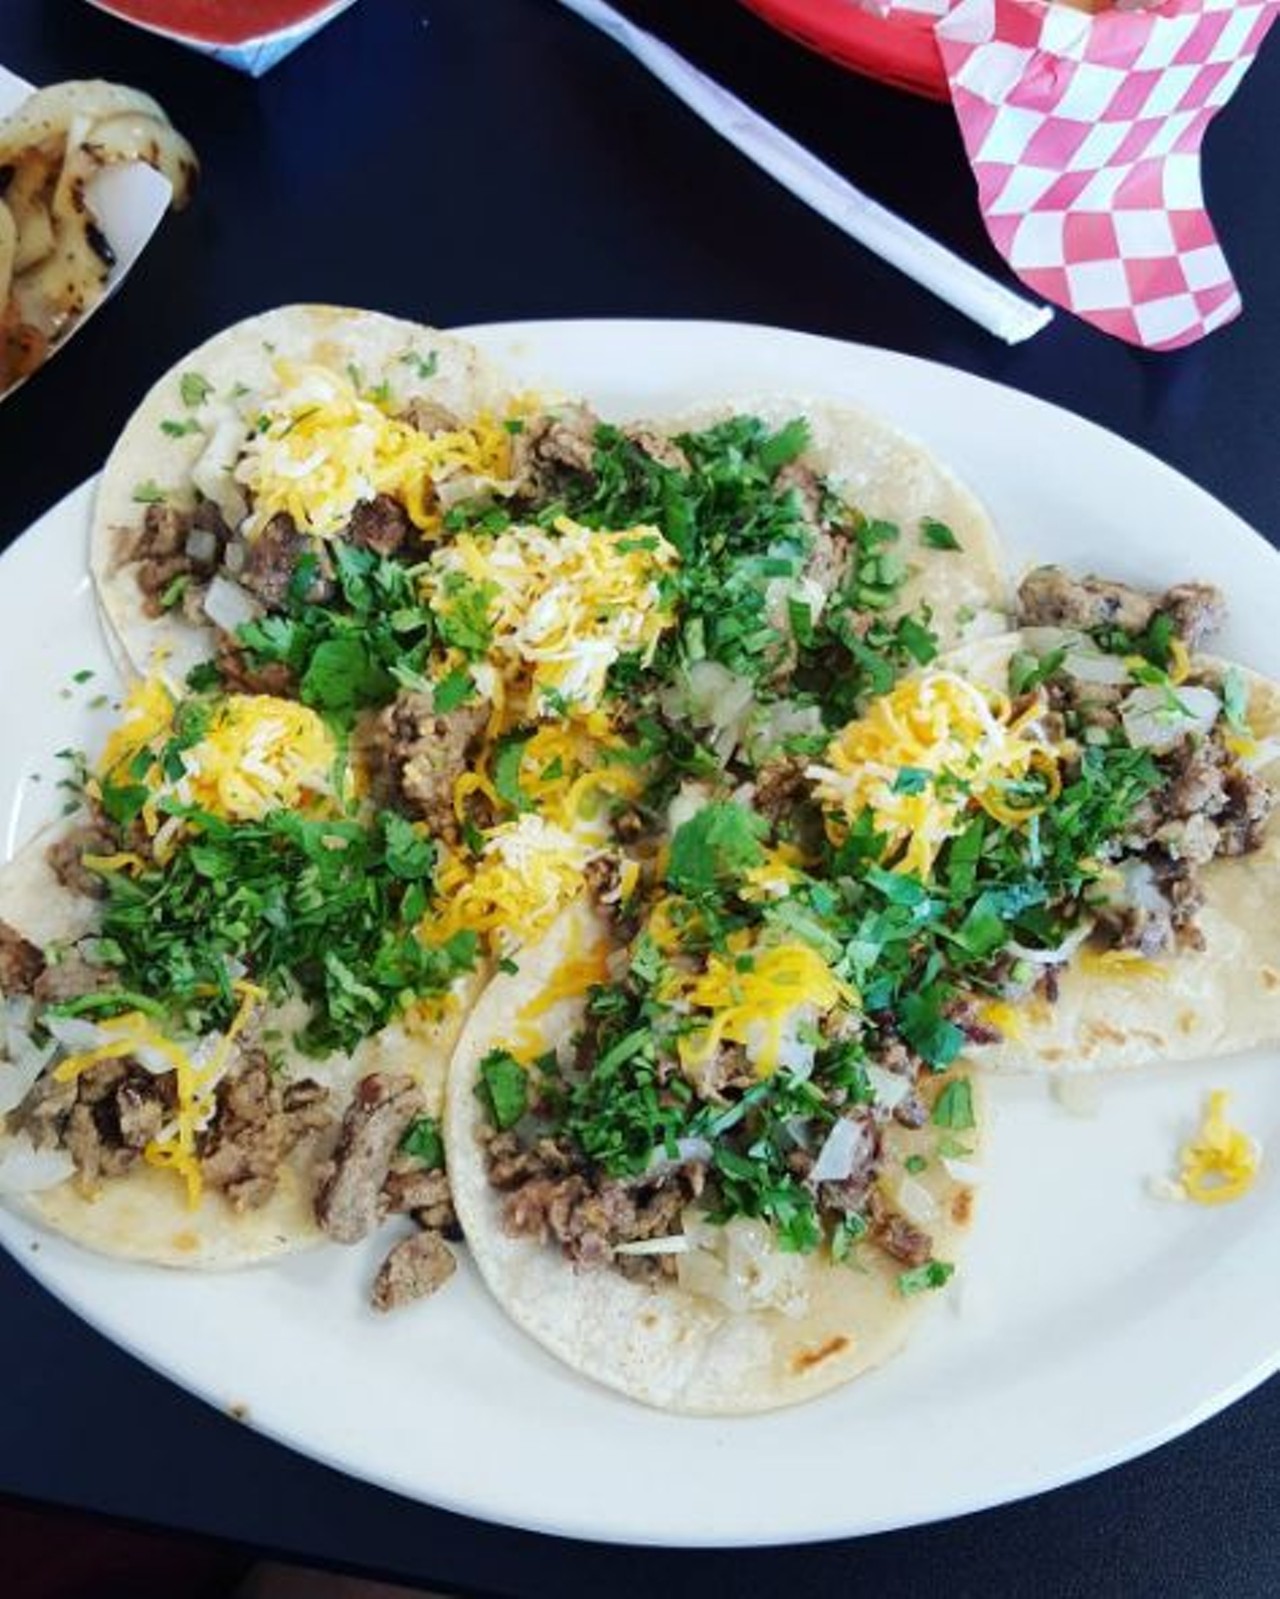 Los Balito’s Taco Shop
Multiple locations, losbalitostacoshop.com
Loaded fries can mean a lot of things, but here it means fries topped with carne asada. Snag some Sunday through Thursday from 6am to midnight or Fri and Sat til 3 a.m.
Photo via Instagram, theofficiallaroyce